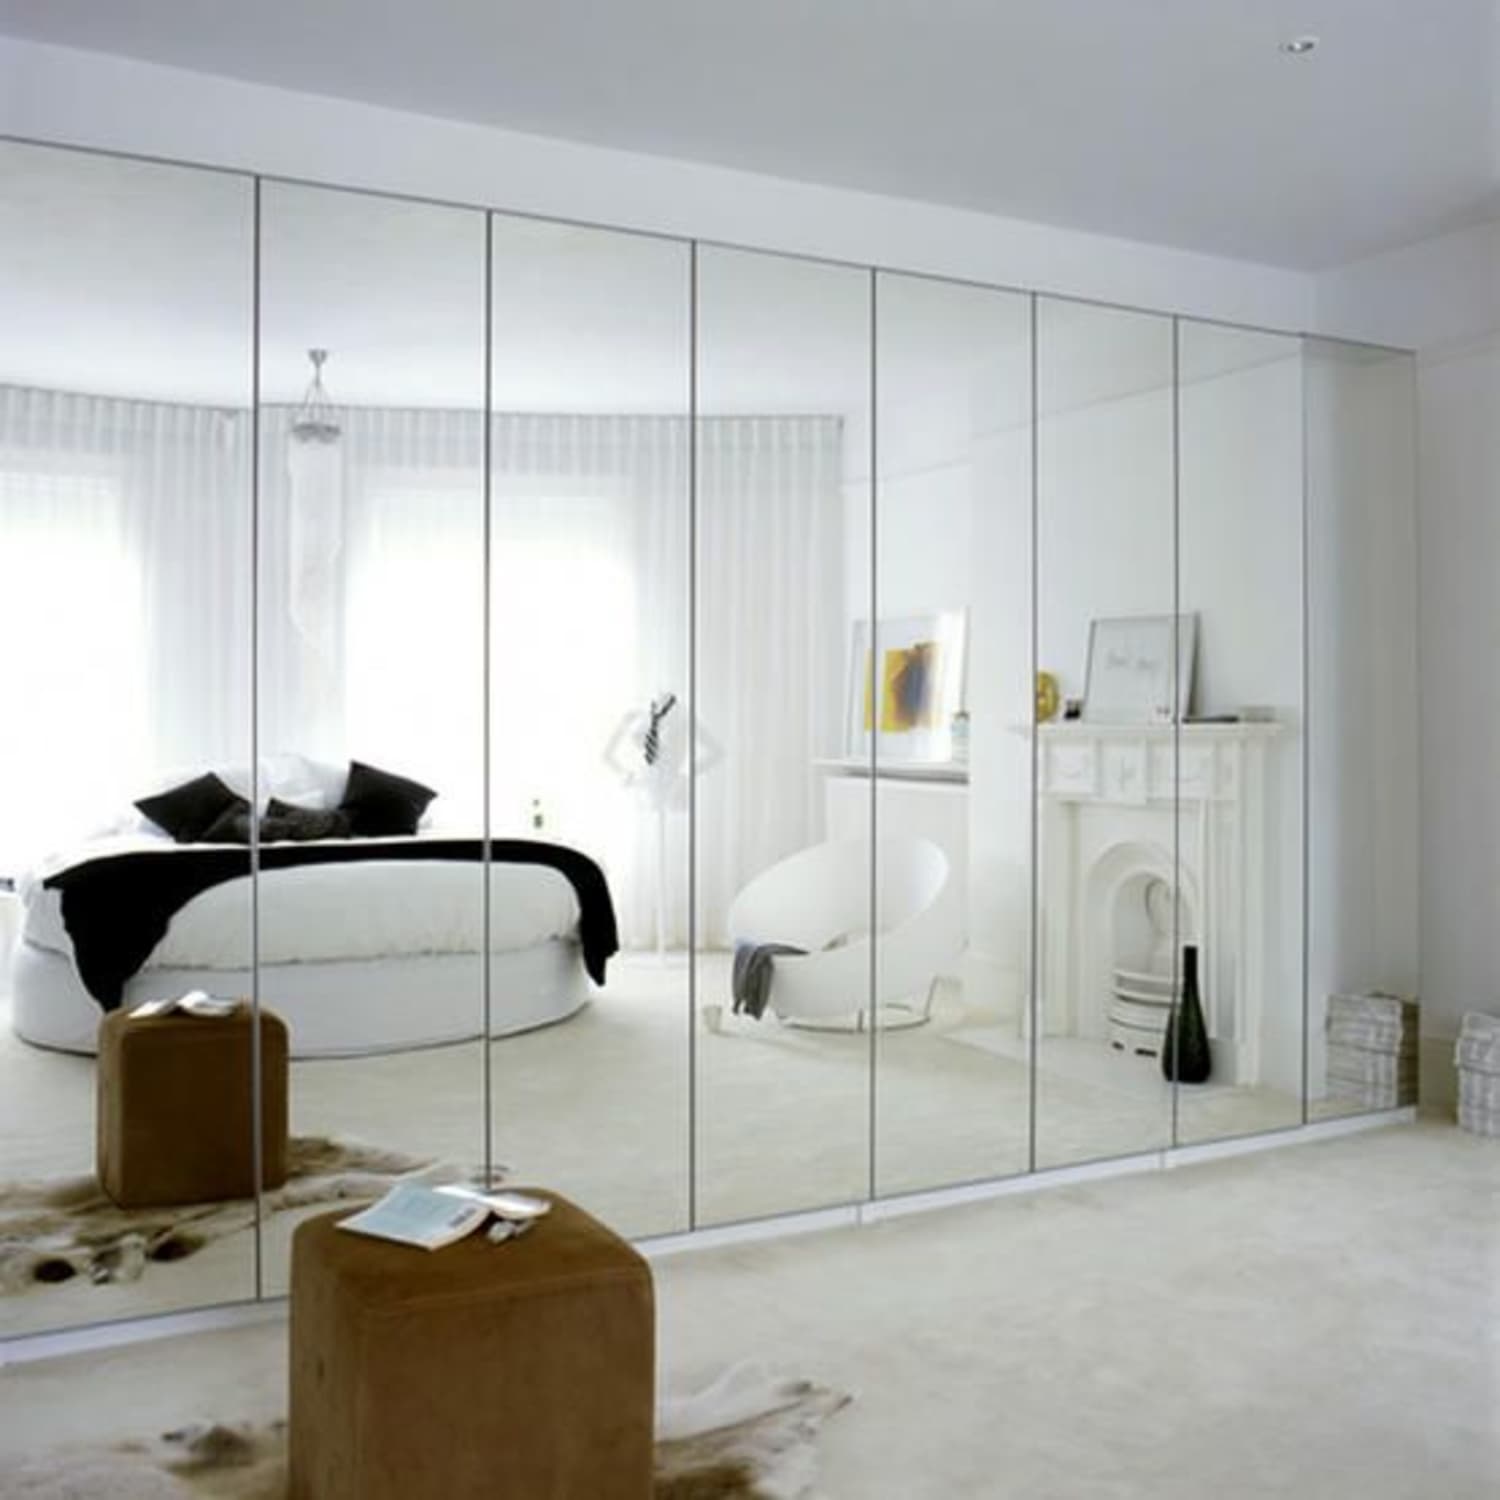 Plagued With Dated Mirrored Walls? 5 Design Ideas to Make Them Work